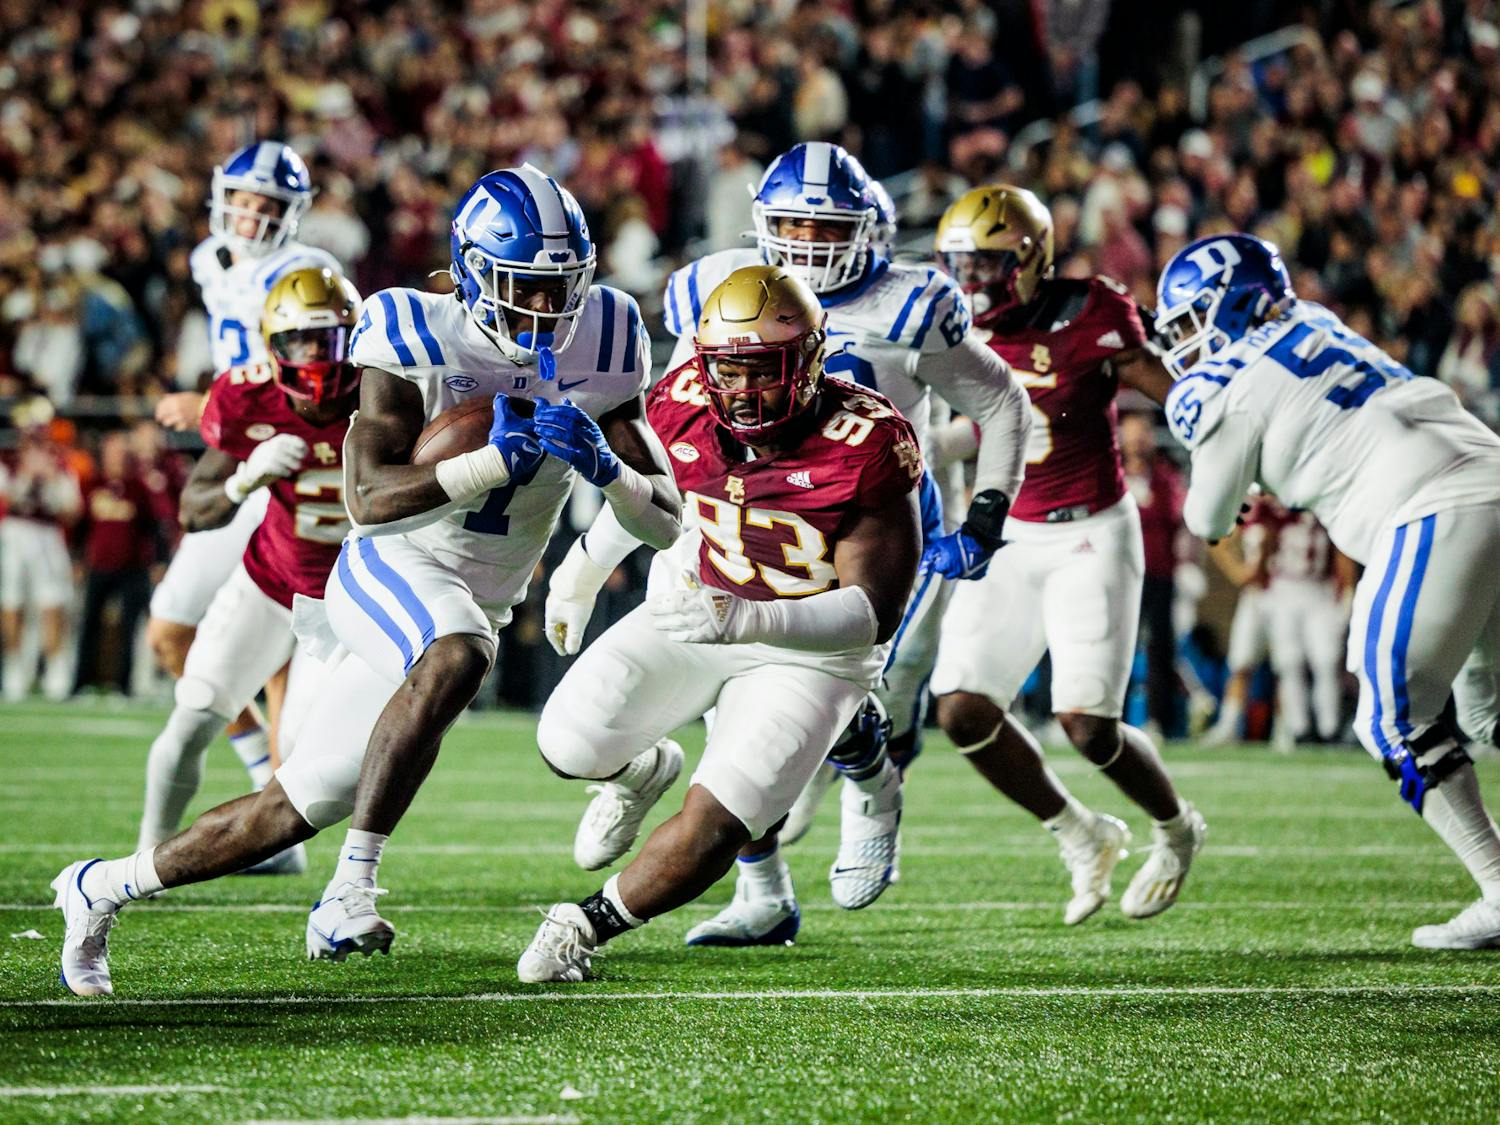 Jordan Waters helped Duke run all over Boston College as the Blue Devils earned their sixth win.